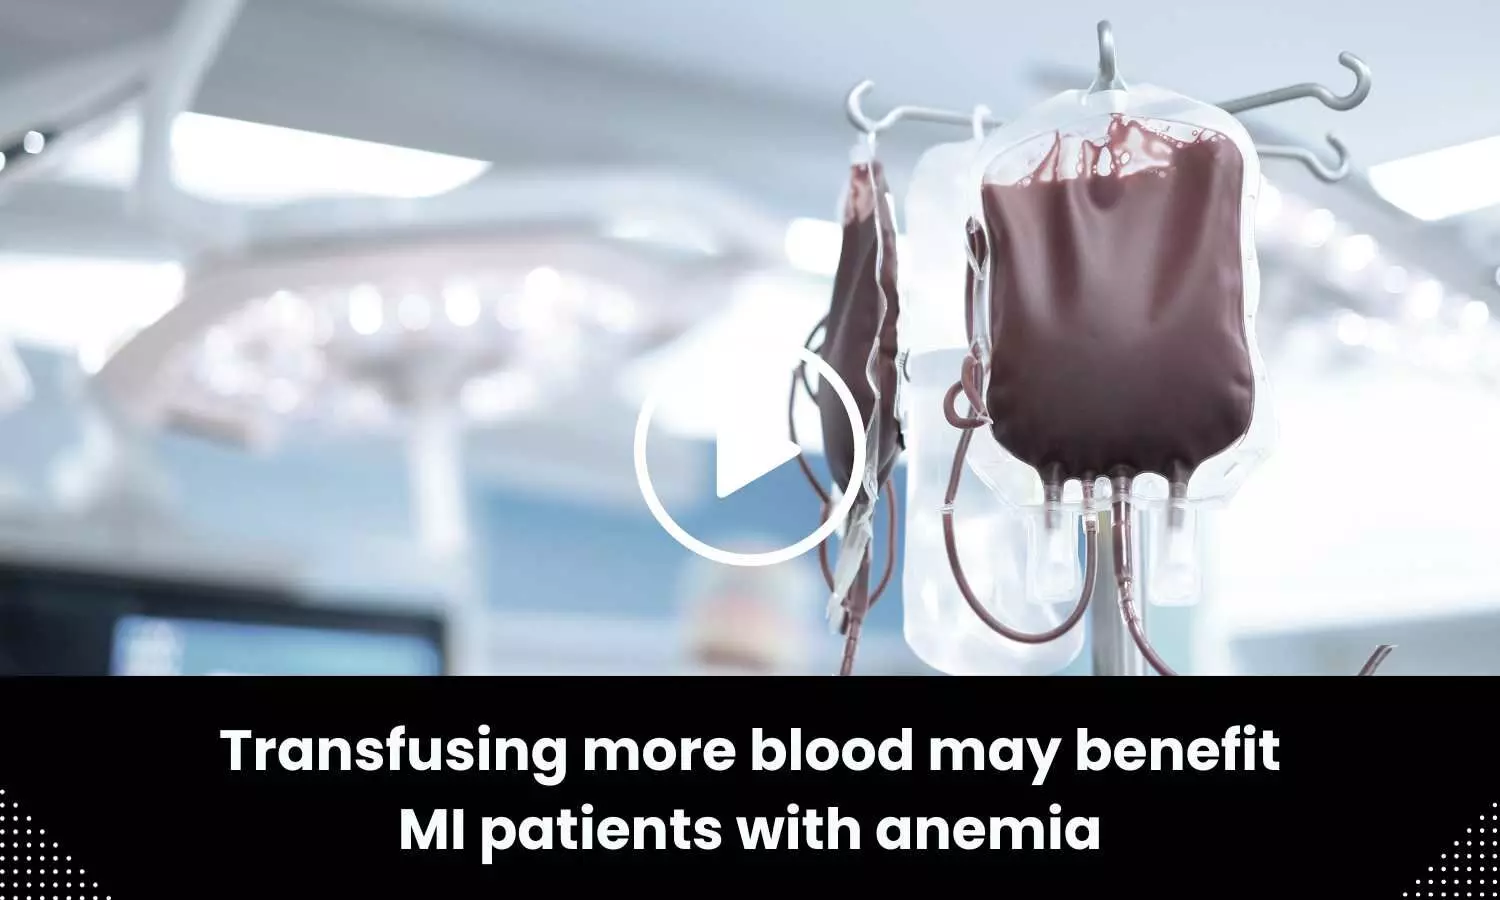 Transfusing more blood may benefit MI patients with anemia